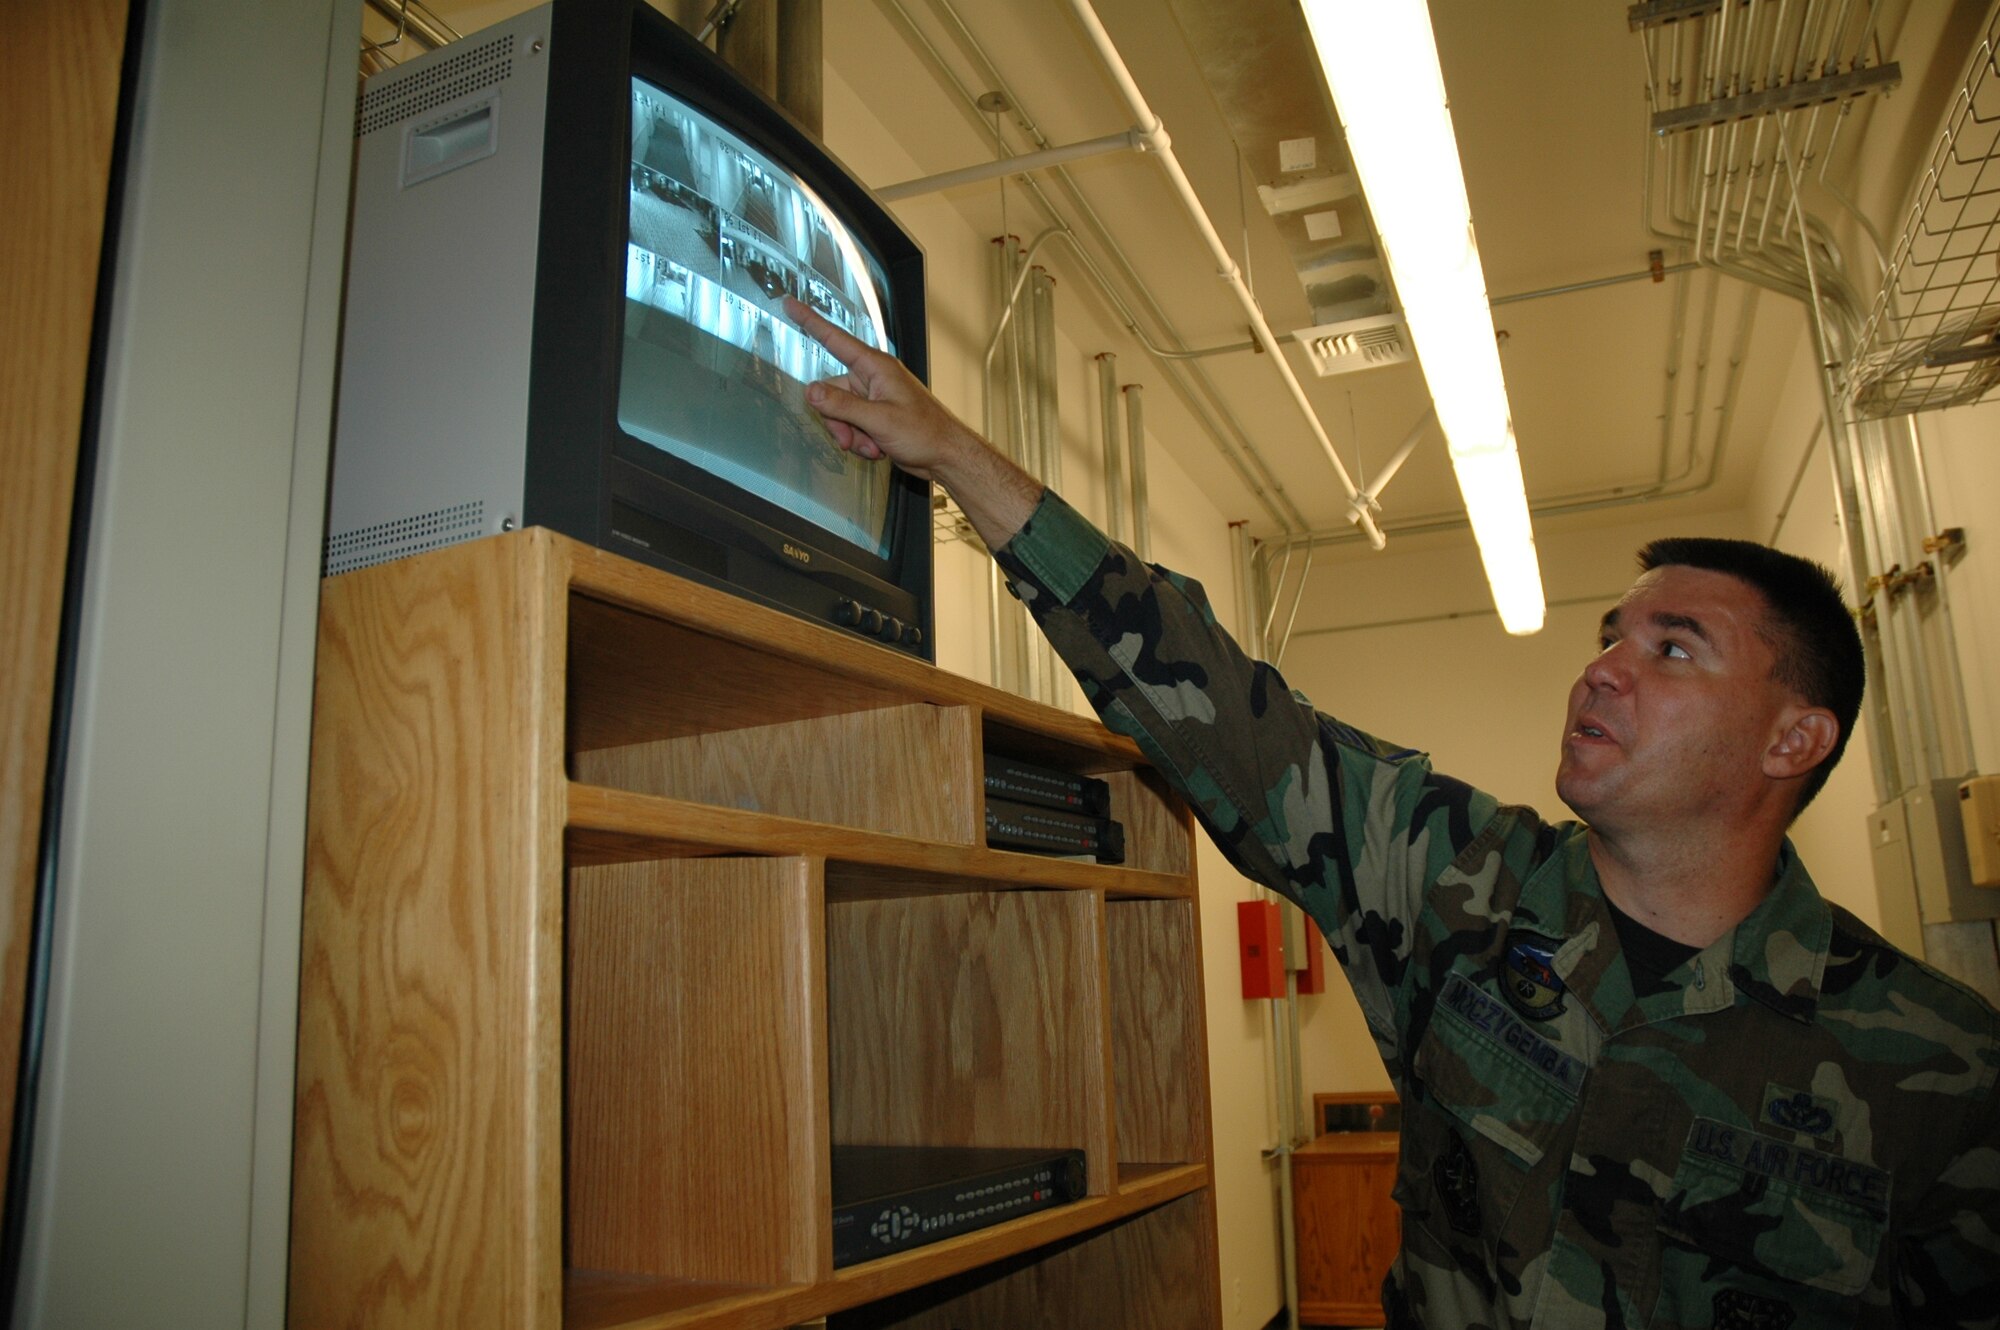 Master Sgt. Albert Moczygemba, 341st Civil Engineer Squadron dorm manager, reviews tapes from cameras positioned throughout a dormitory. Dorm management positions are open at Malmstrom and individuals are needed to step up to take on this challenging and rewarding position. (U.S. Air Force photo / Airman 1st Class Emerald Ralston)